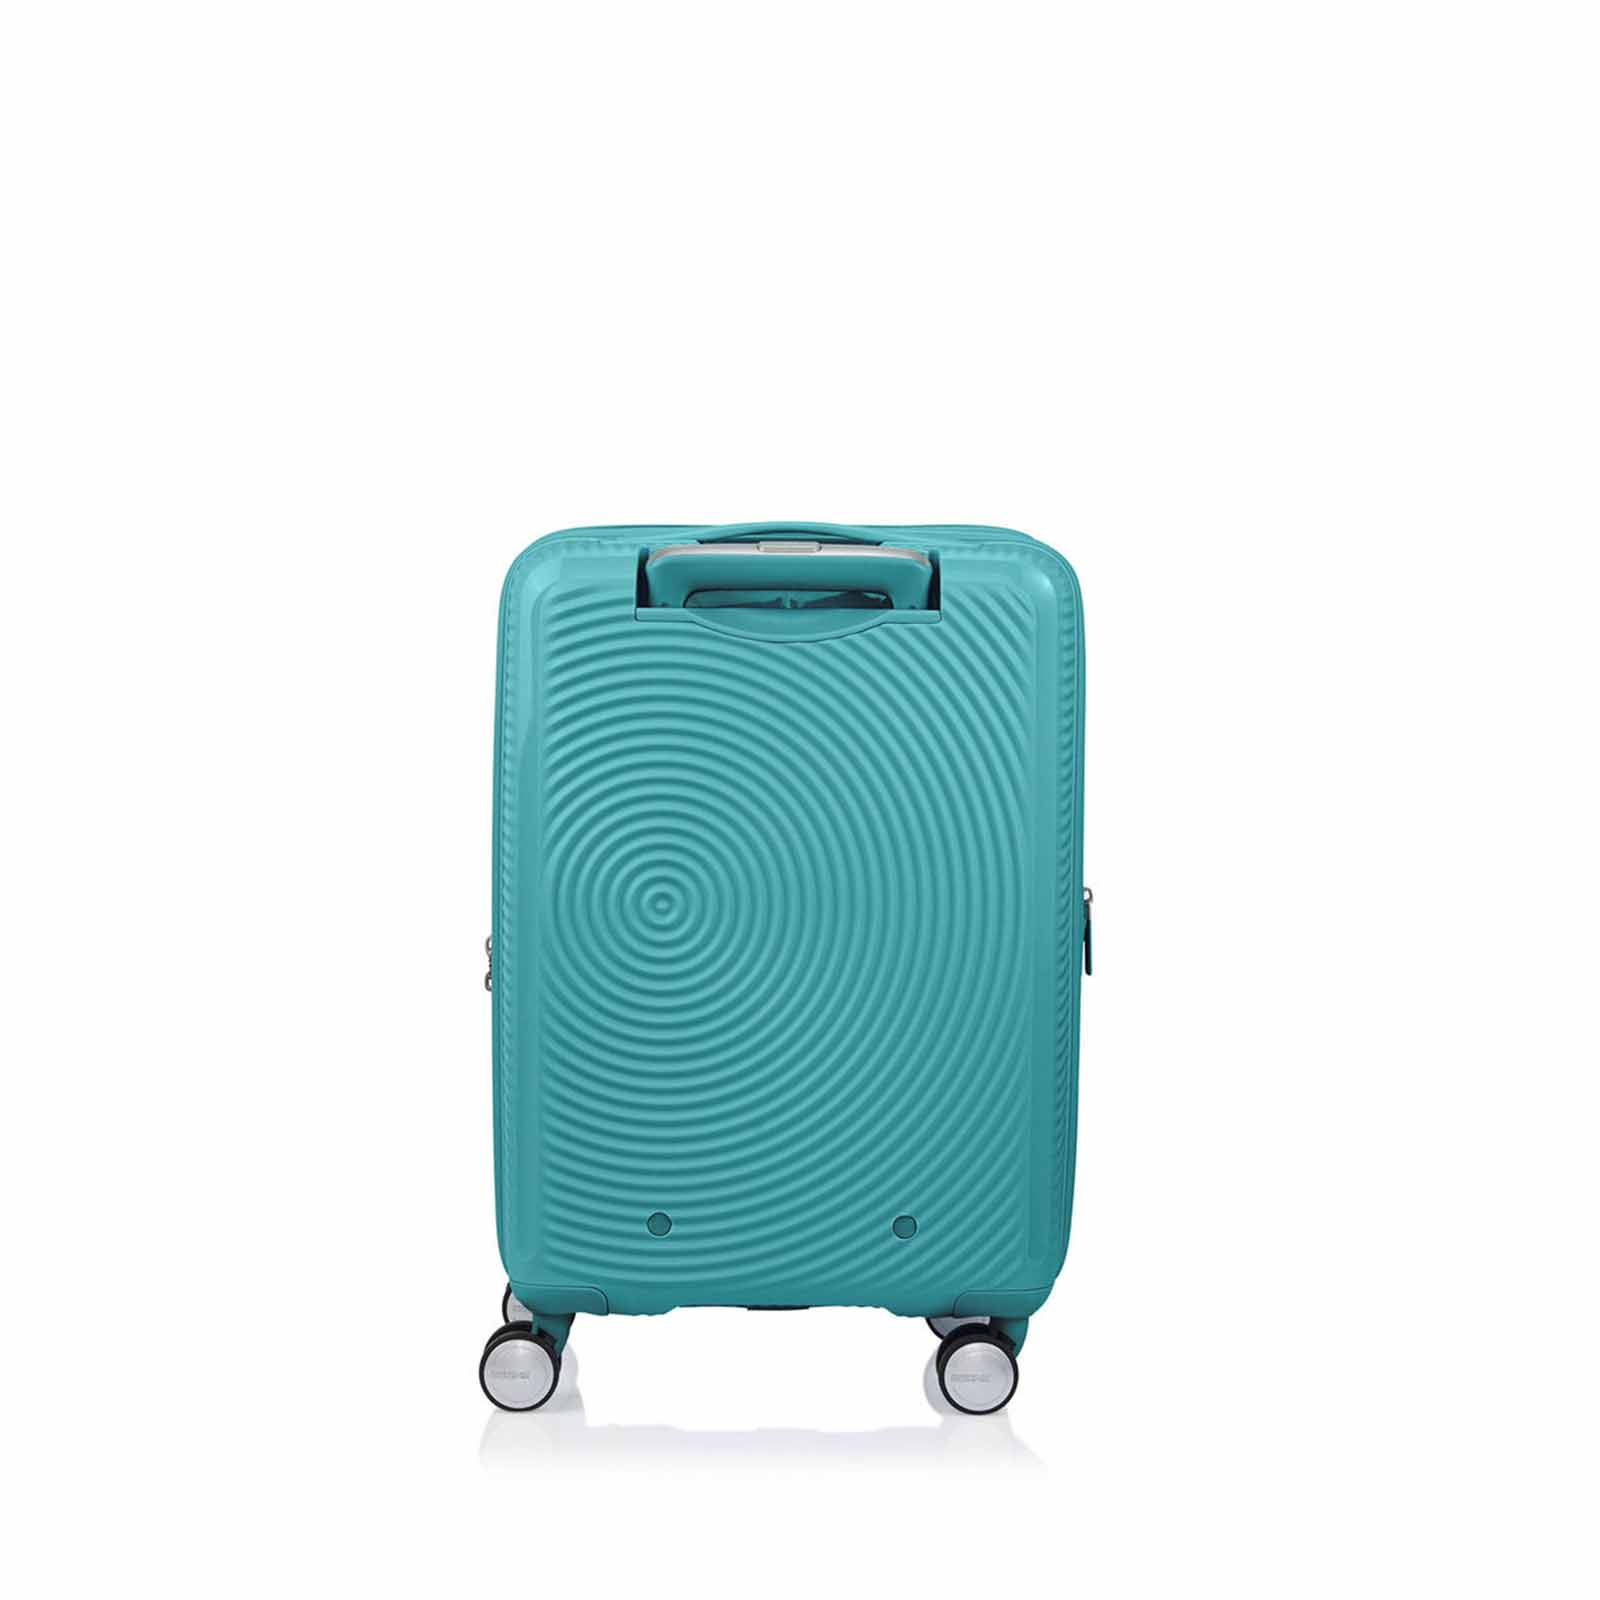 American-Tourister-Curio-2-55cm-Carry-On-Suitcase-Jade-Green-Back